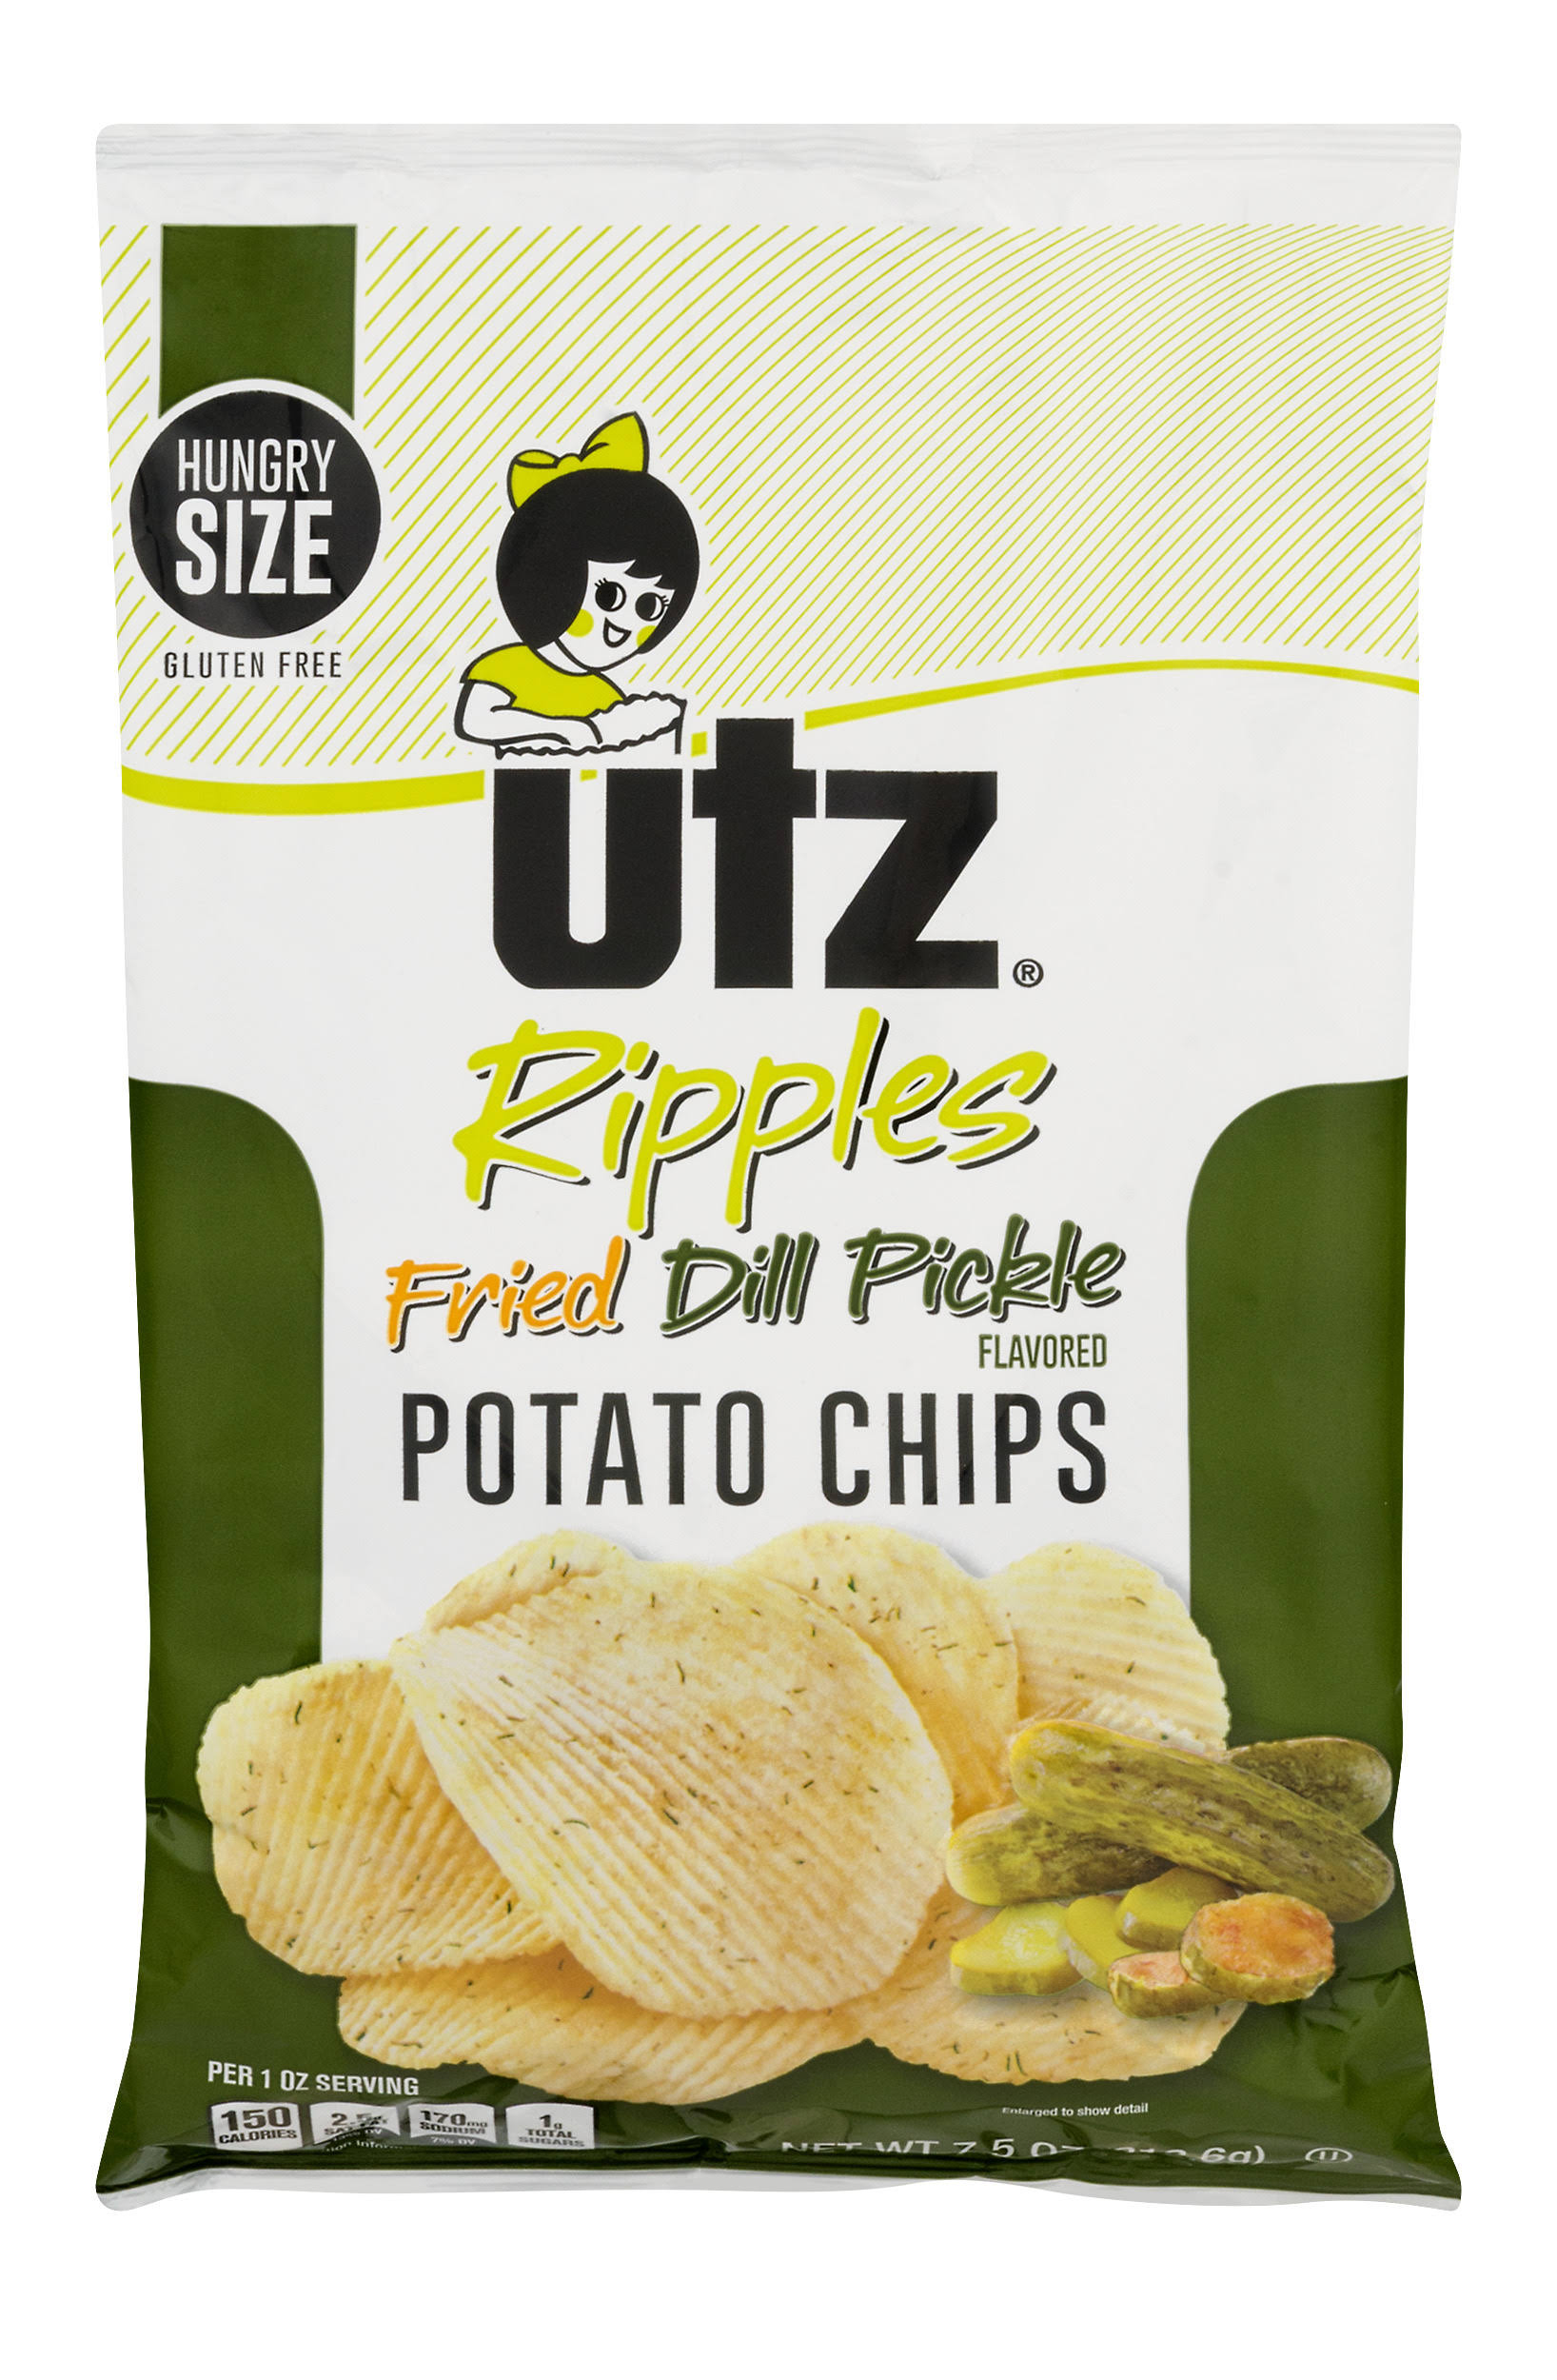 Utz Potato Chips, Fried Dill Pickle Flavored, Ripples, Hungry Size - 7.5 oz